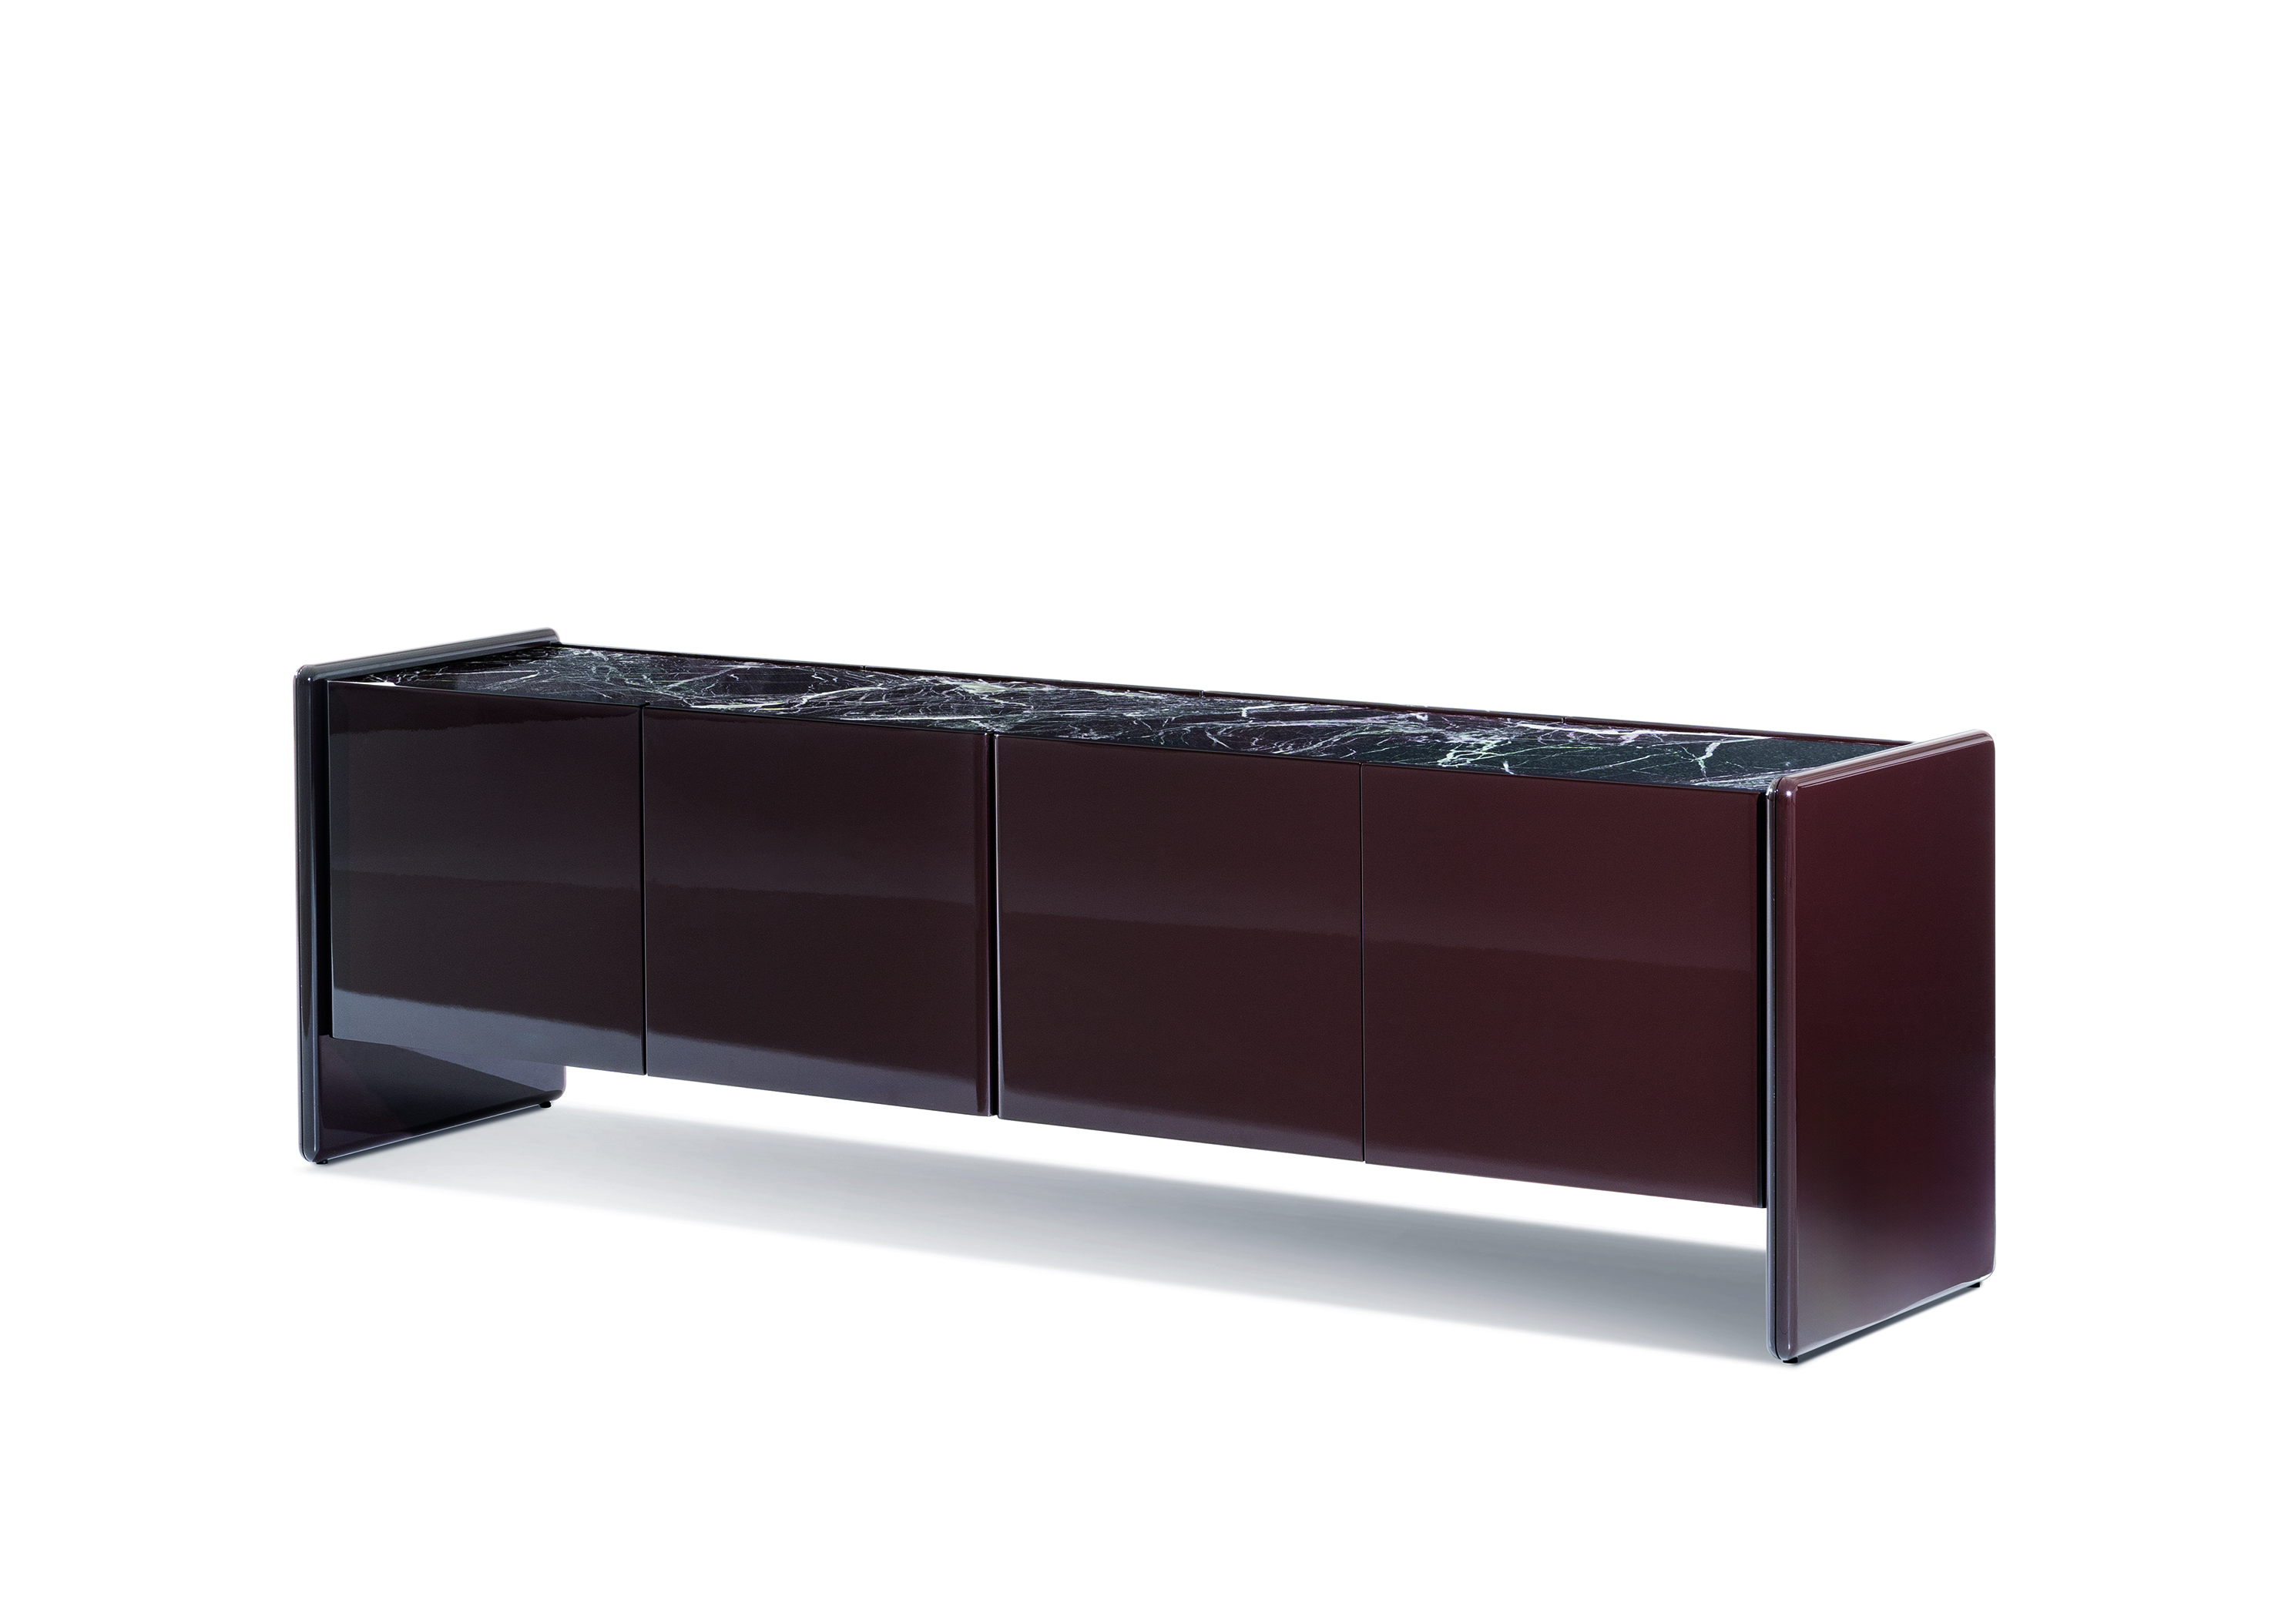 Milan Design Week Minotti Logan console unit in red with black and red marble top